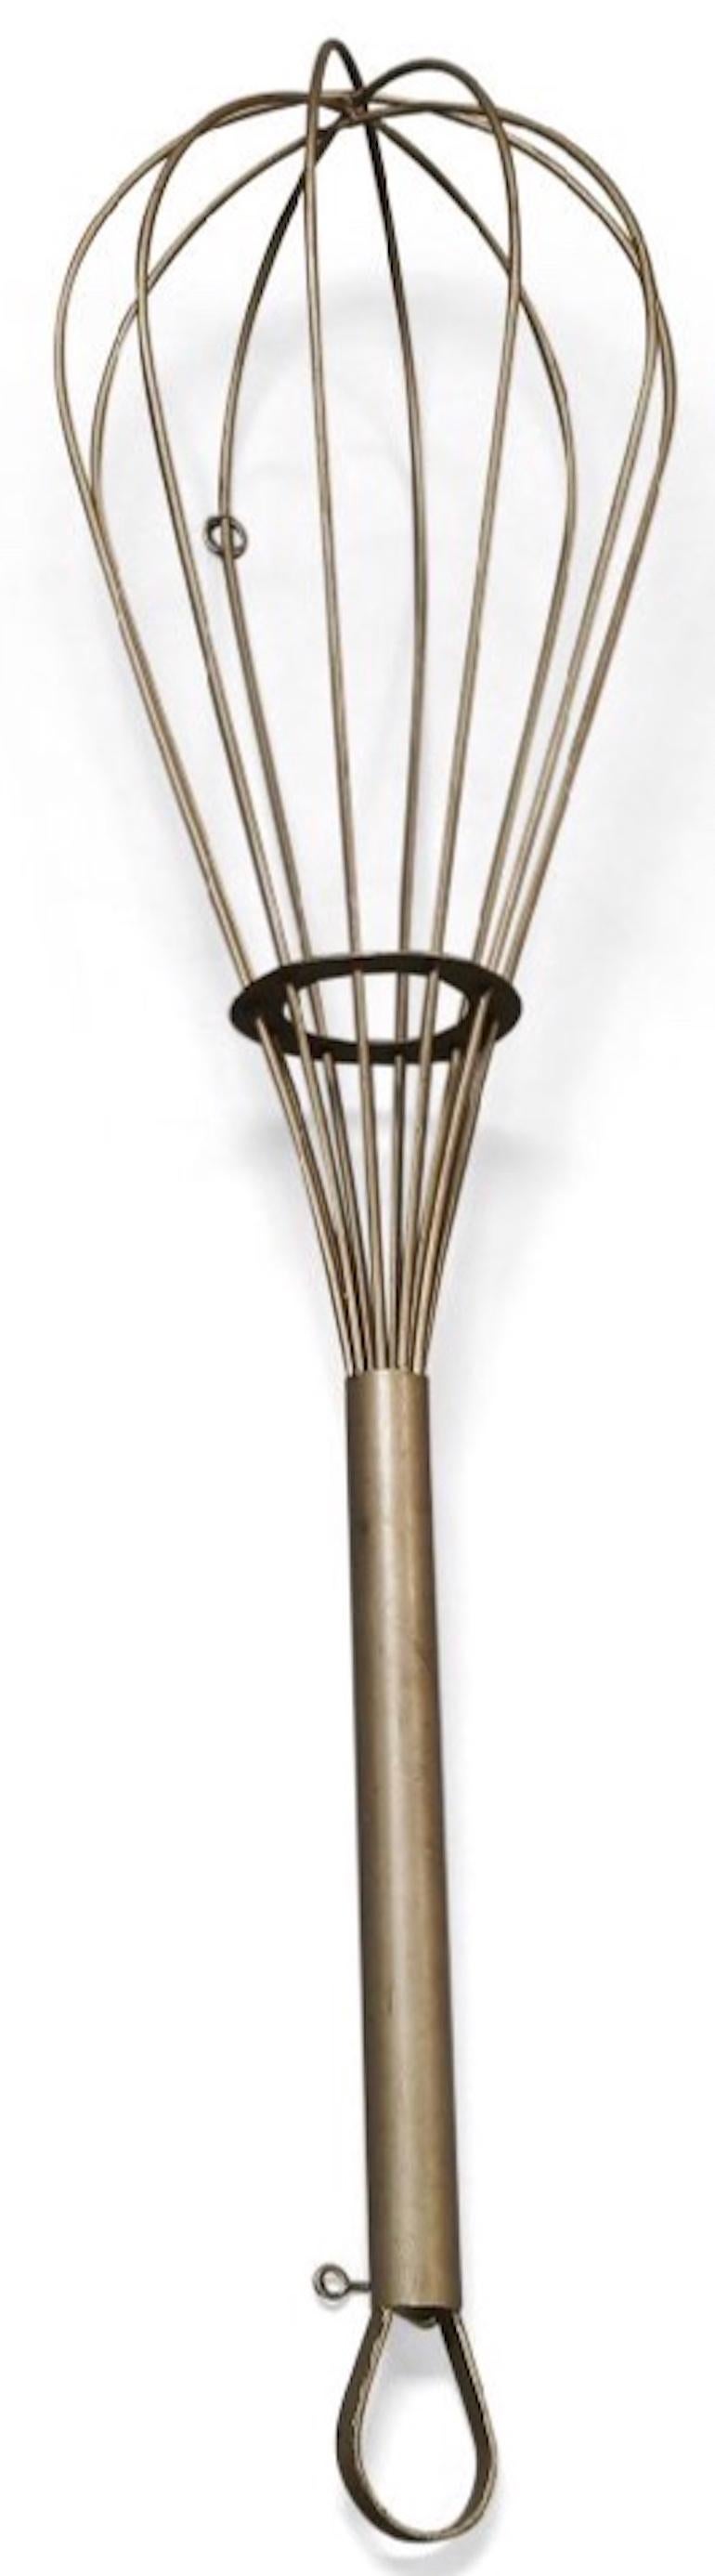 Powder-Coated Curtis Jere Giant Whisk Wall Sculpture Signed and Dated 1994 For Sale